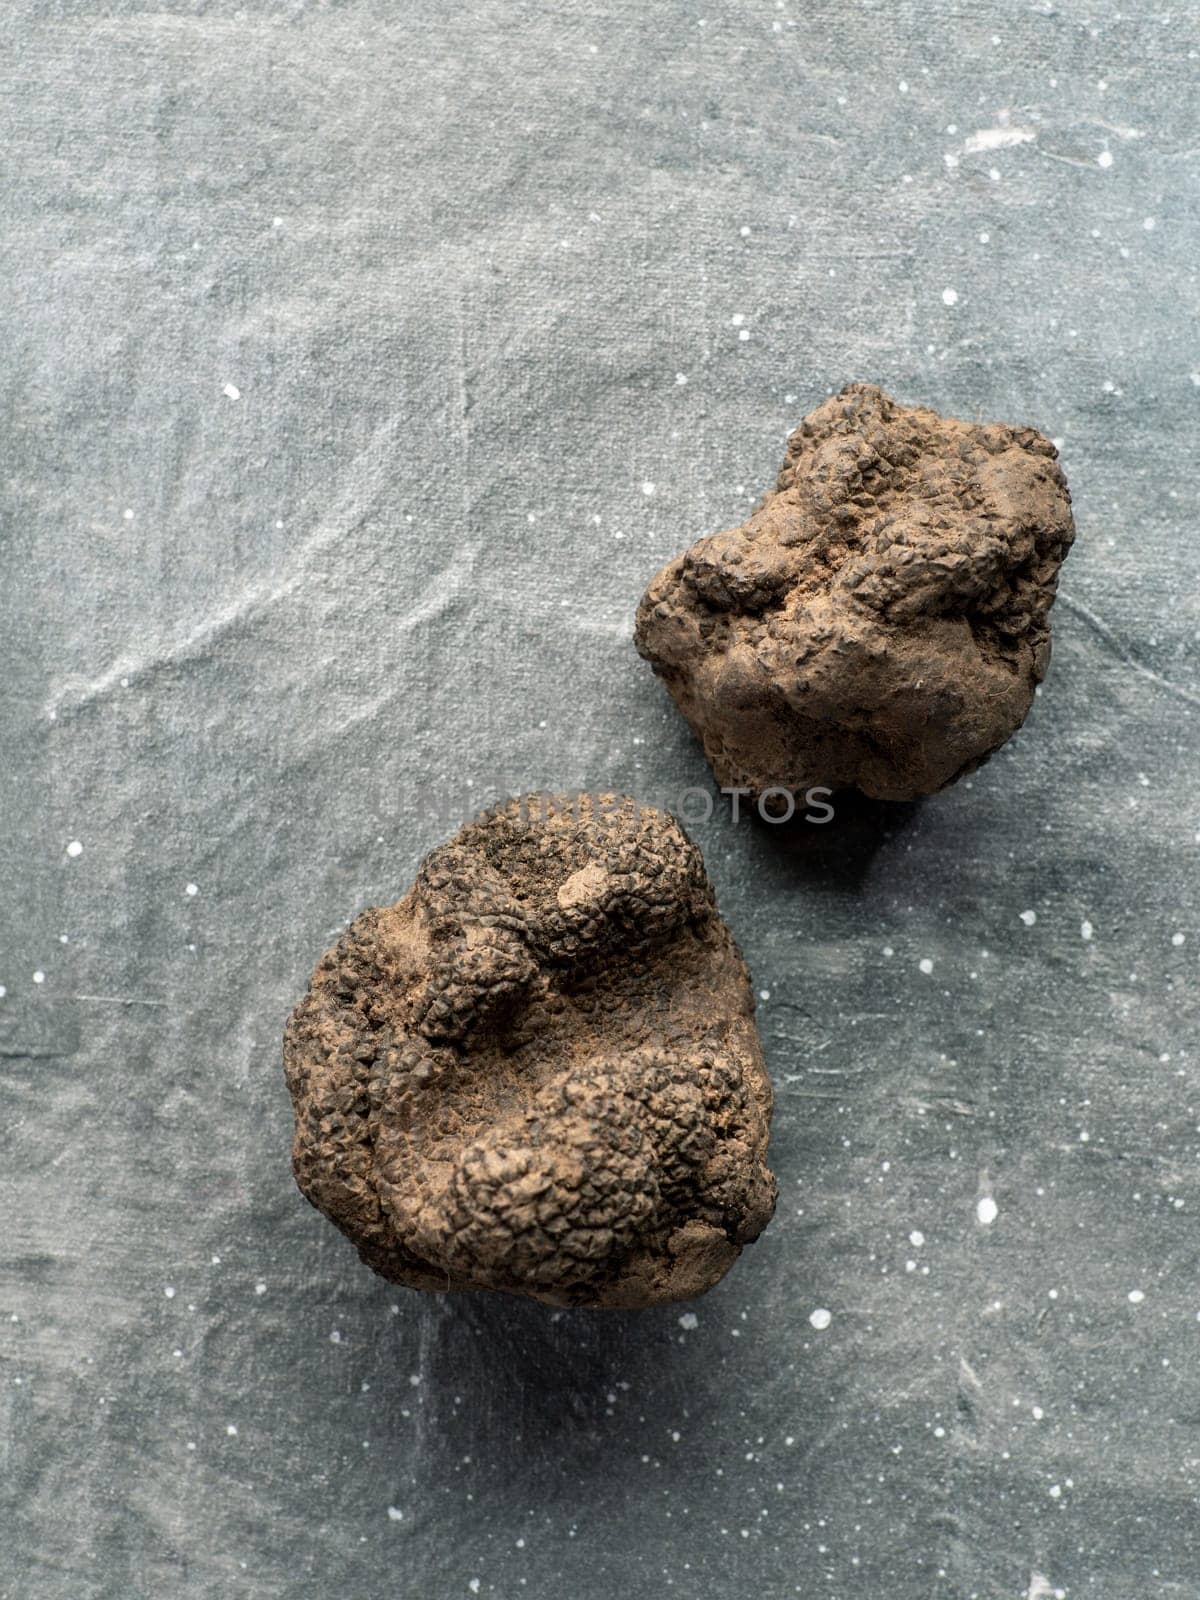 Expensive rare black truffle mushroom on gray background. Vertical. Black truffles top view with copy space for text or design.